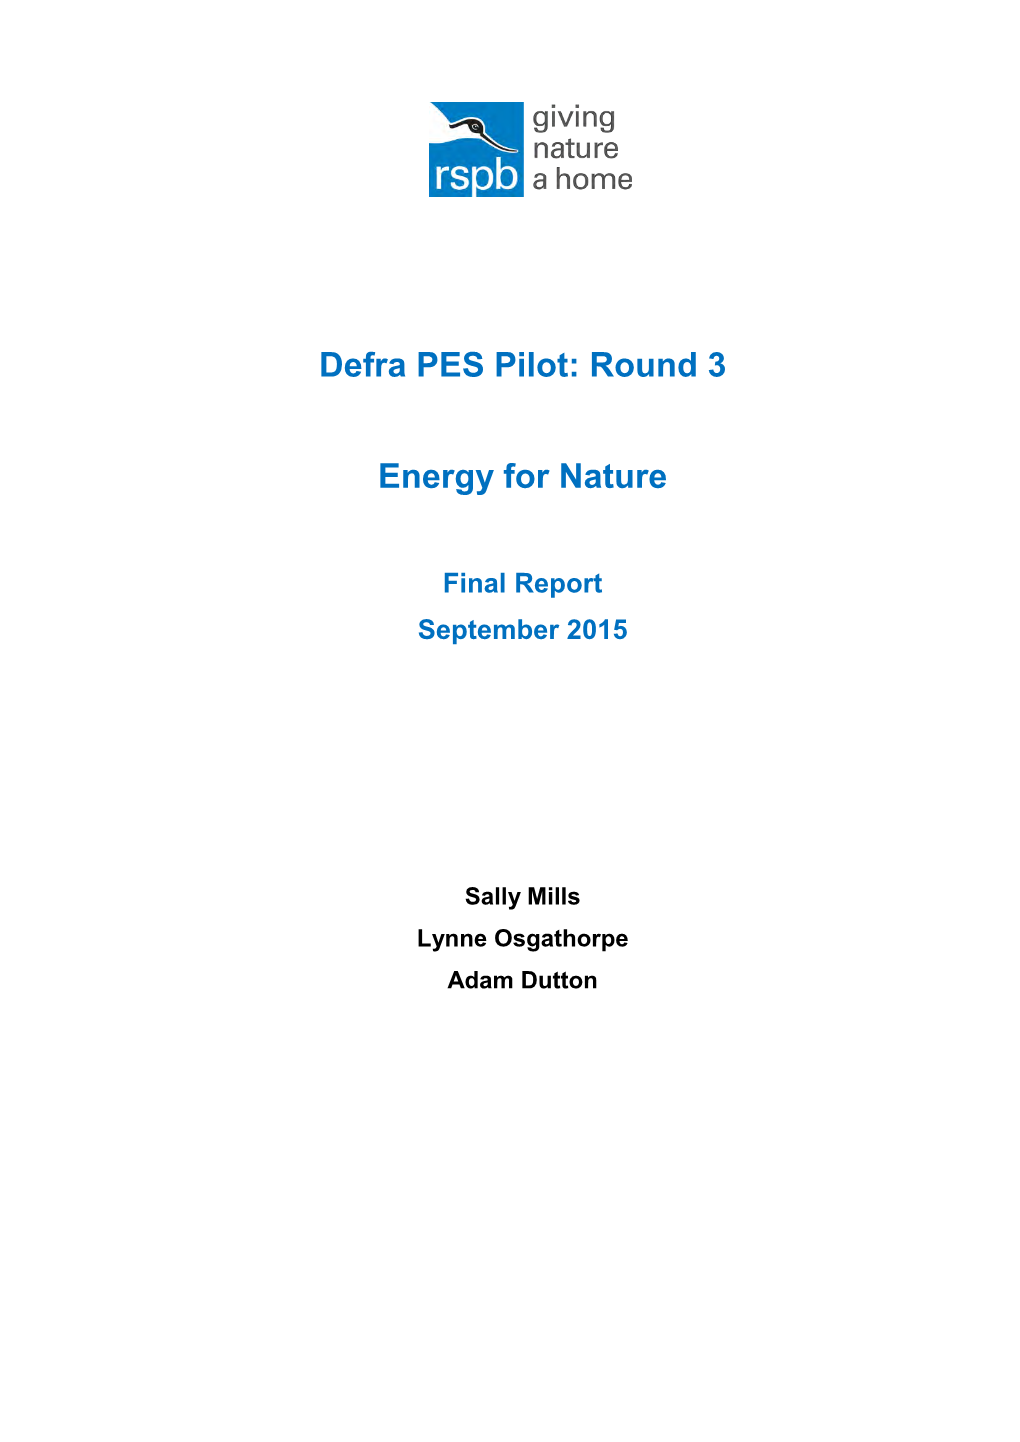 Defra PES Pilot: Round 3 Energy for Nature